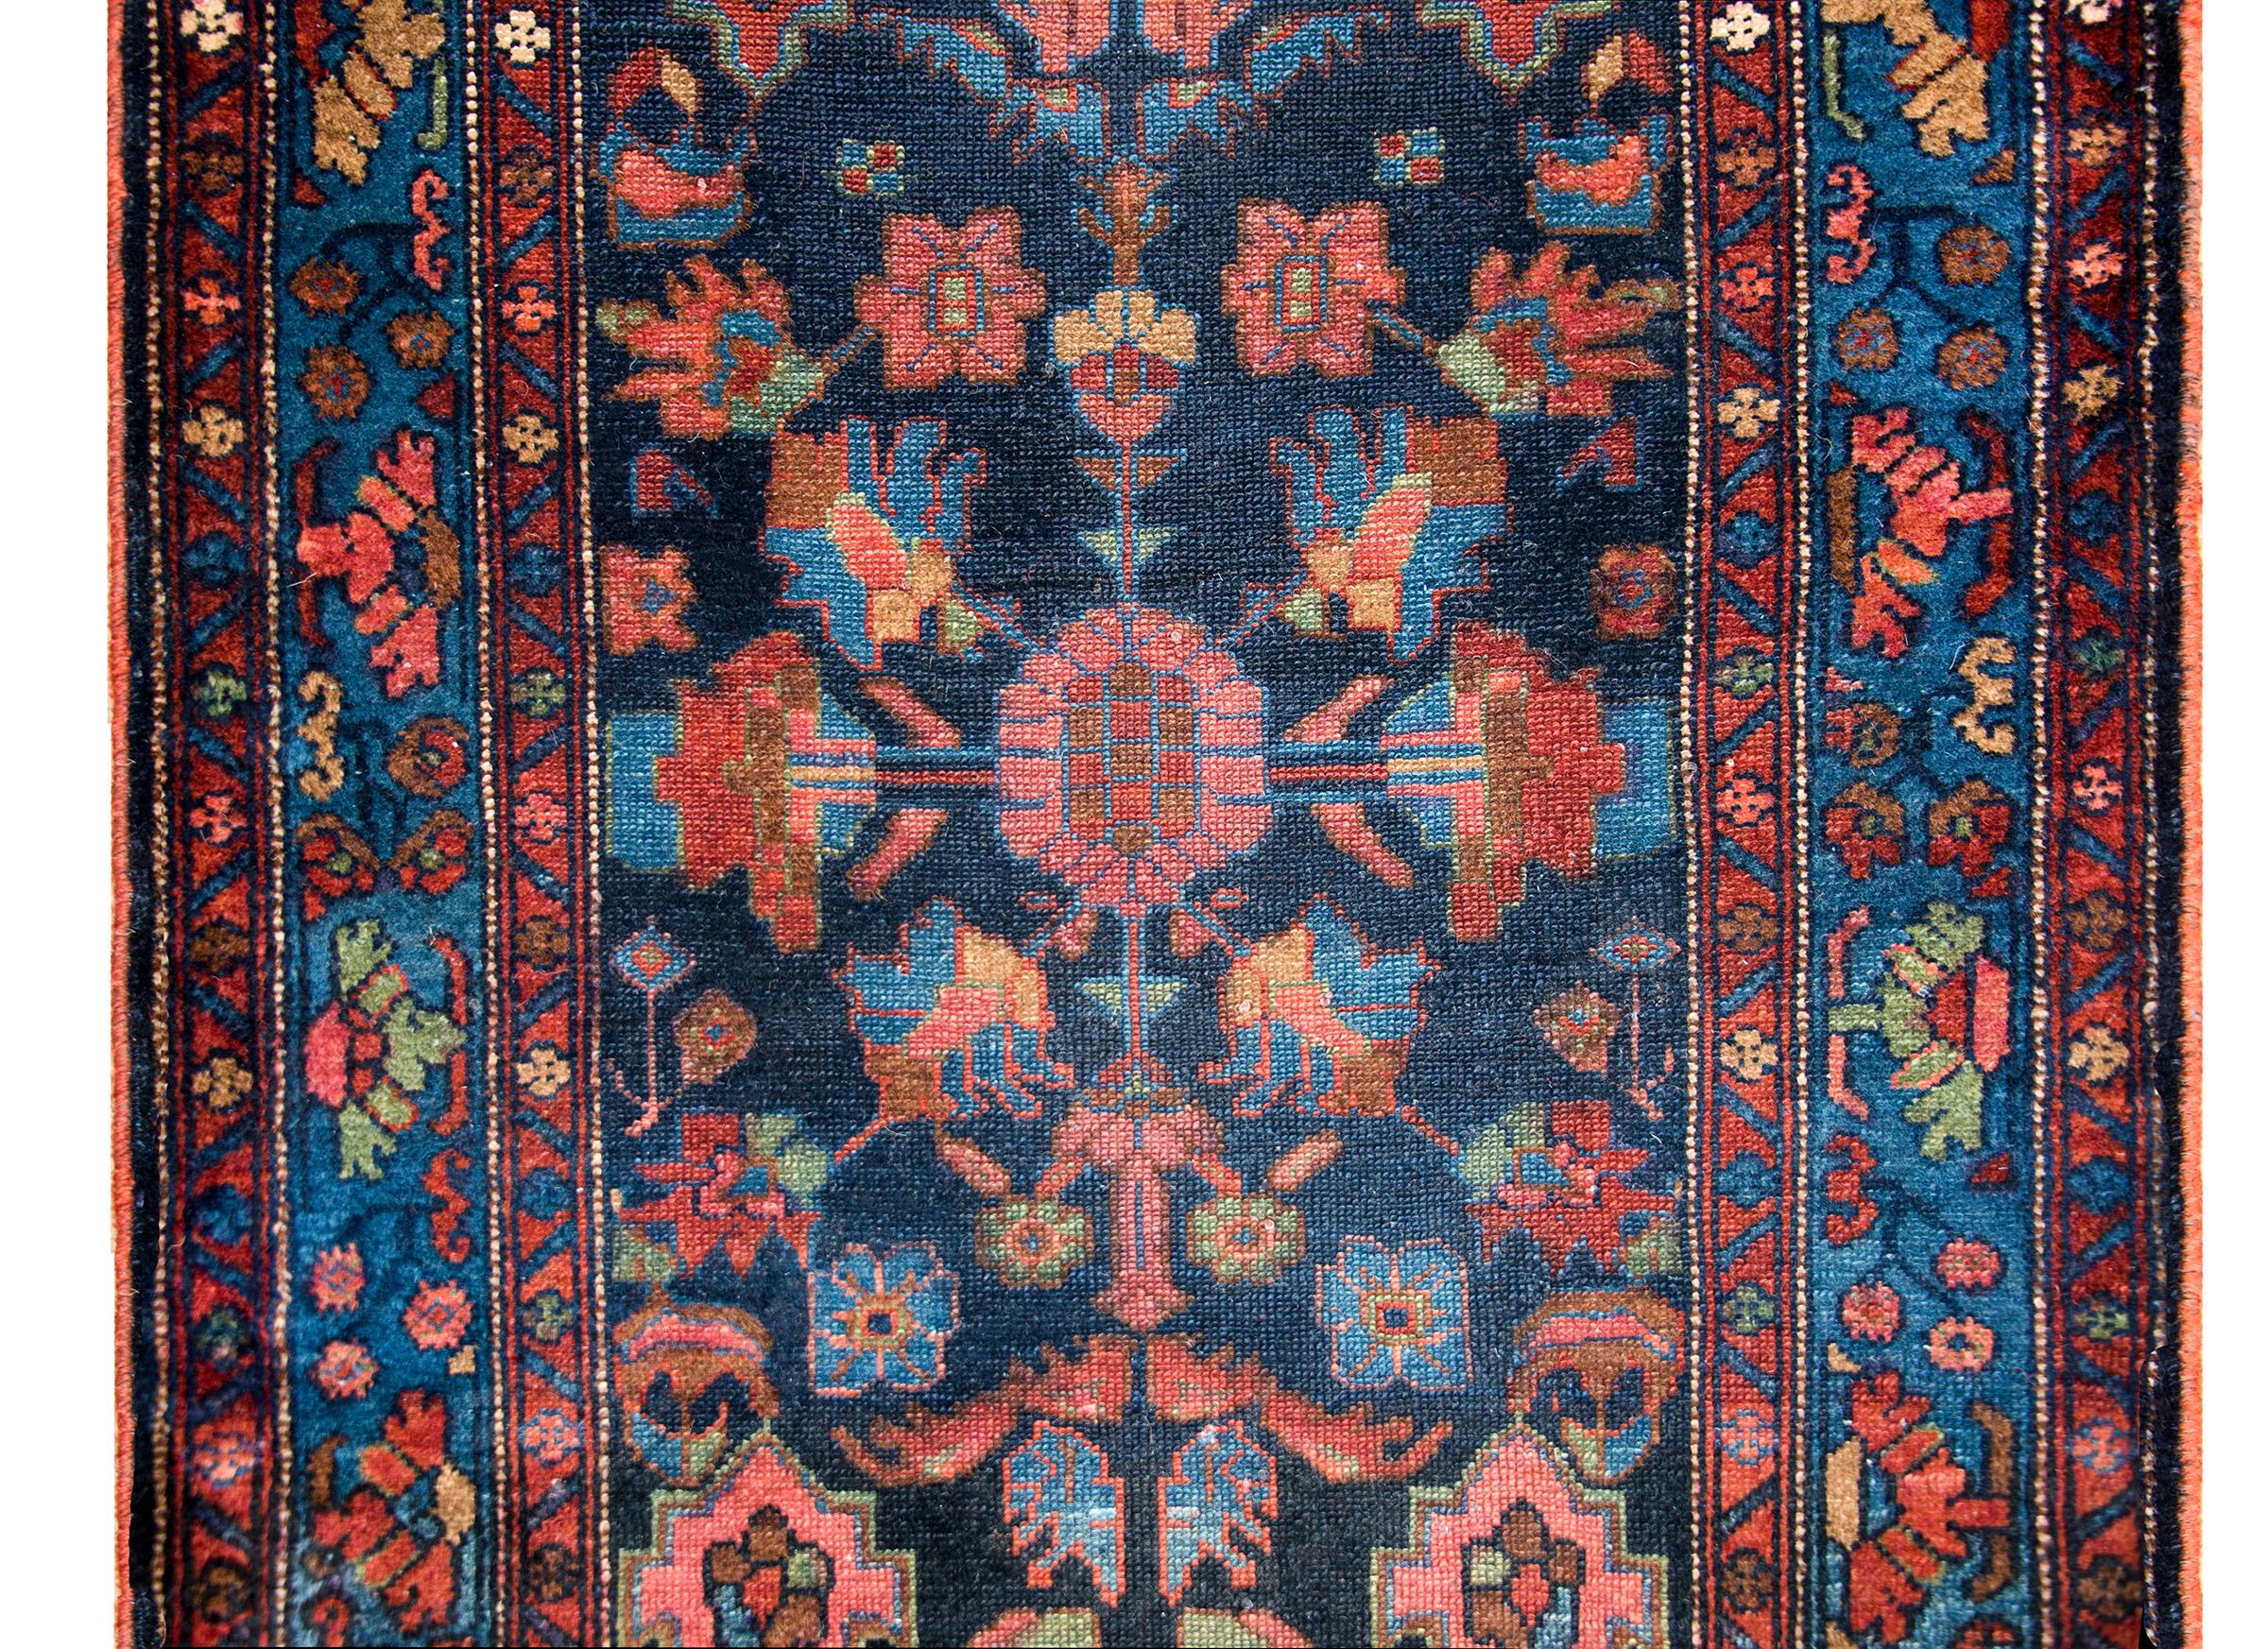 An incredible early 20th century Persian Malayer runner with an incredible mirrored all-over large and small scale floral pattern surrounded by a simple border with a central floral patterned stripe flanked by a pair of matching petite floral